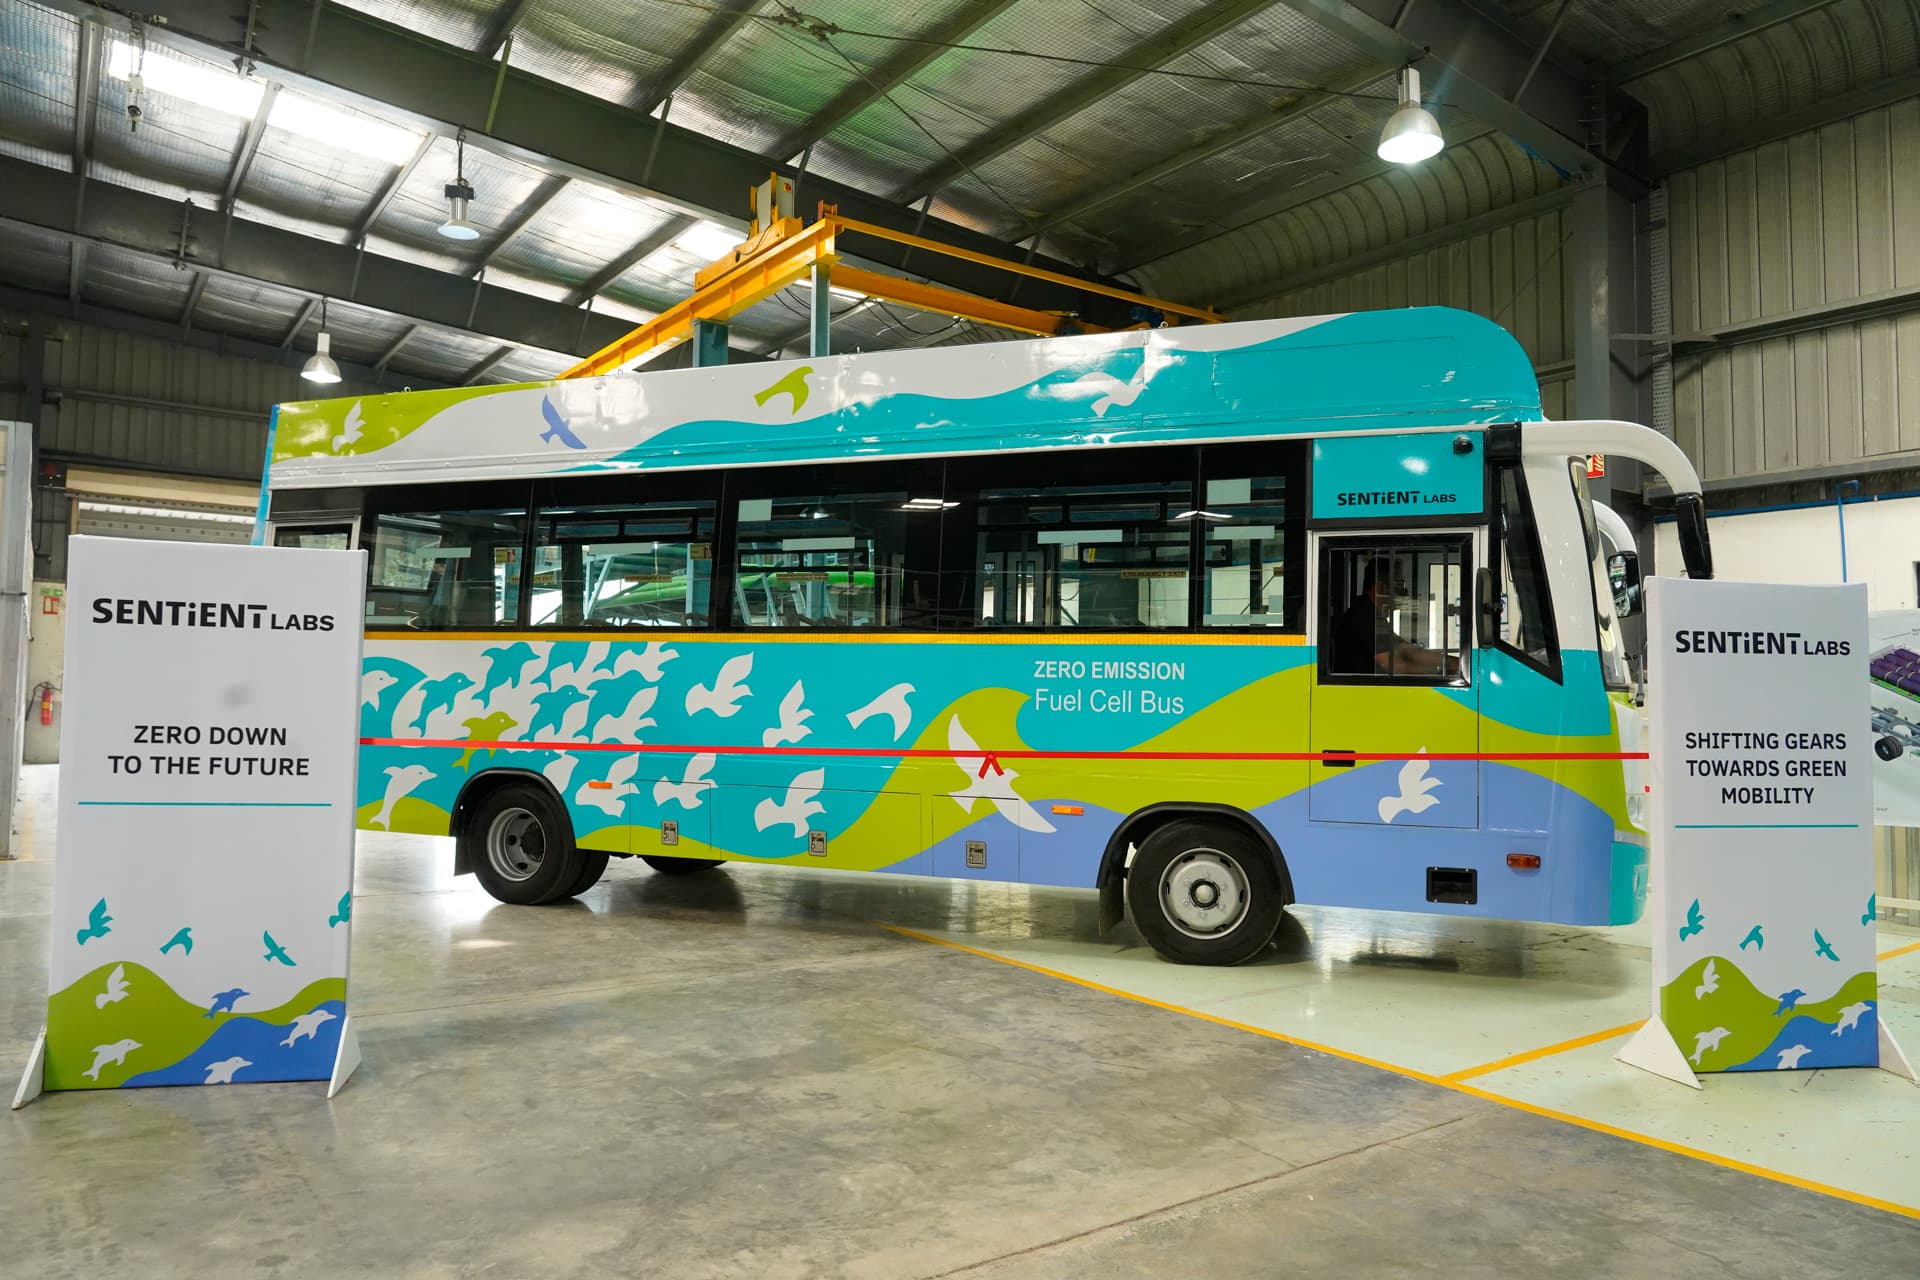 India’s first indigenously built Hydrogen Fuel Cell bus launched in Pune